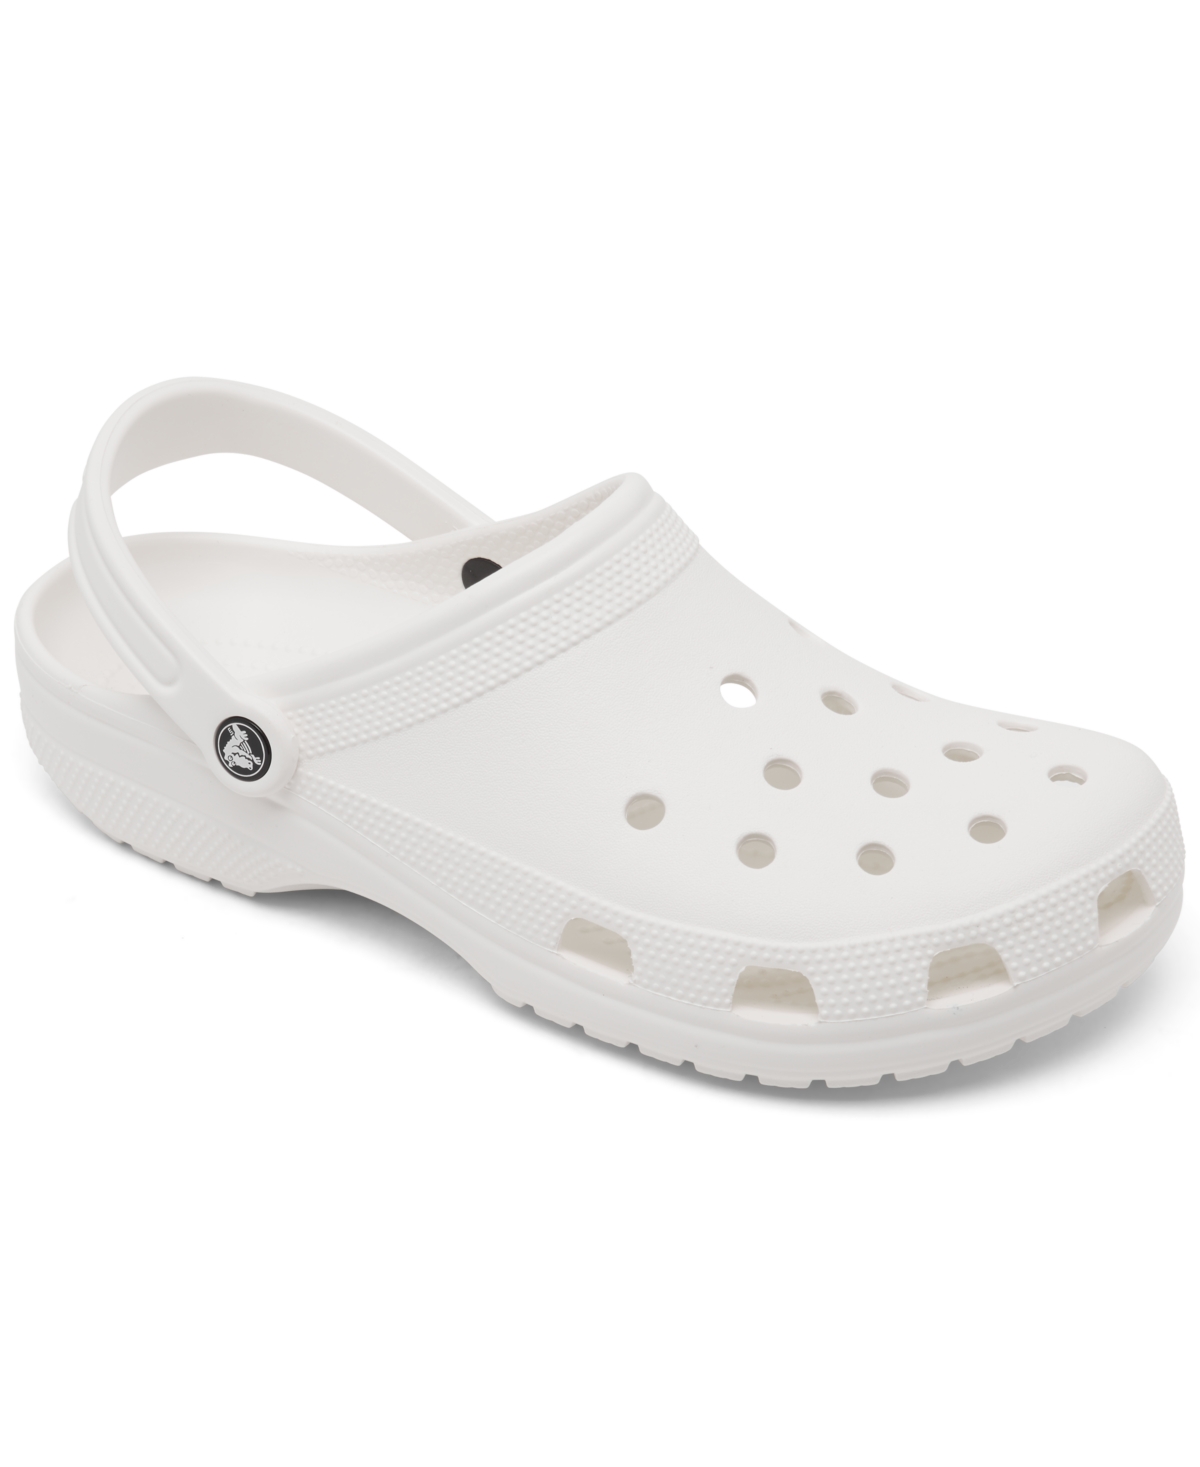 Men's and Women's Classic Clogs from Finish Line - White